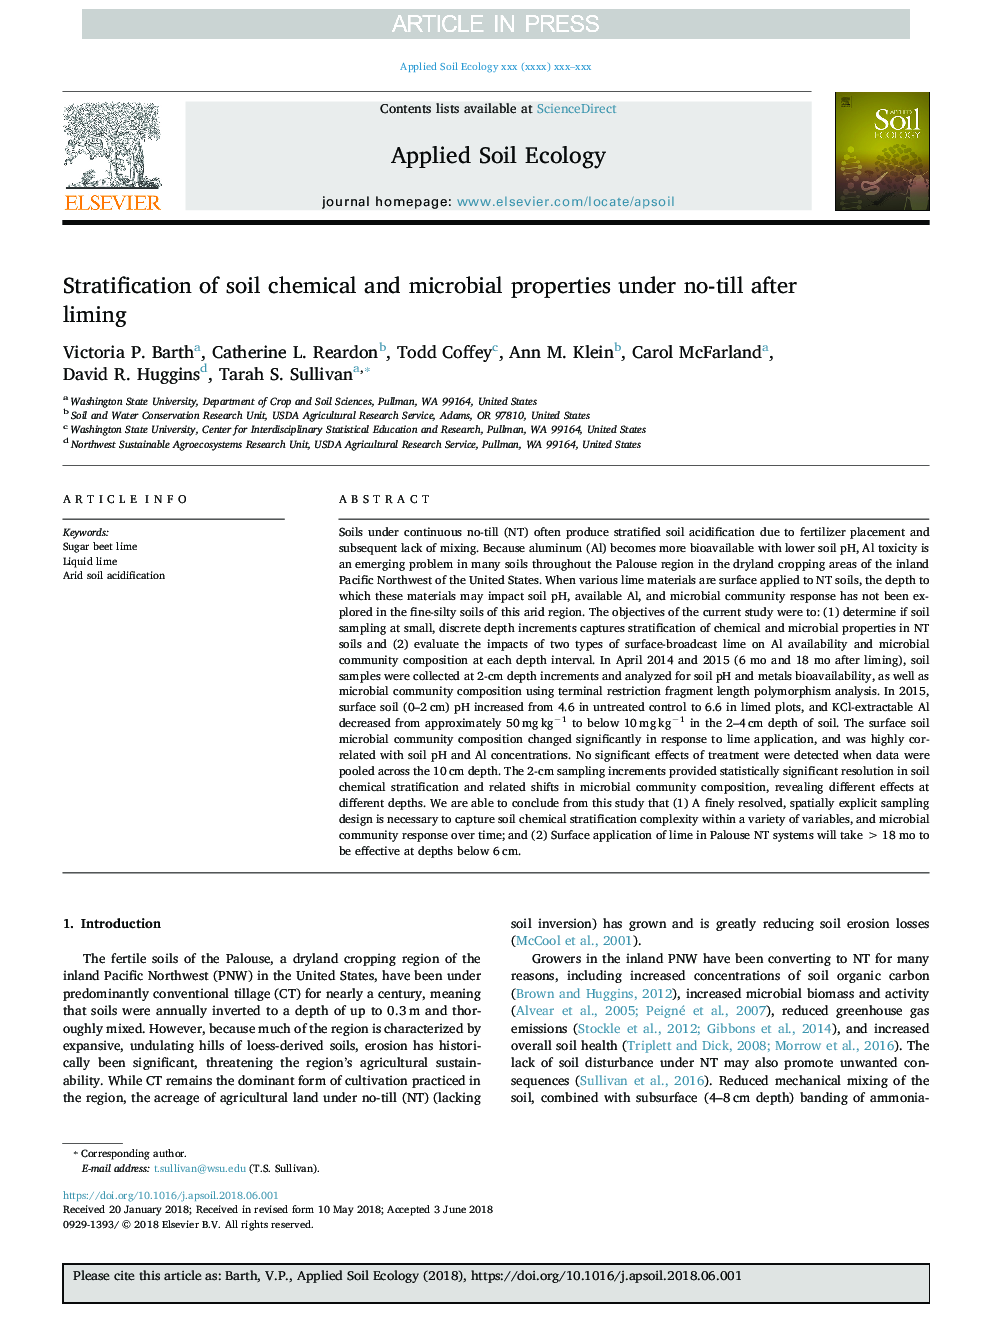 Stratification of soil chemical and microbial properties under no-till after liming